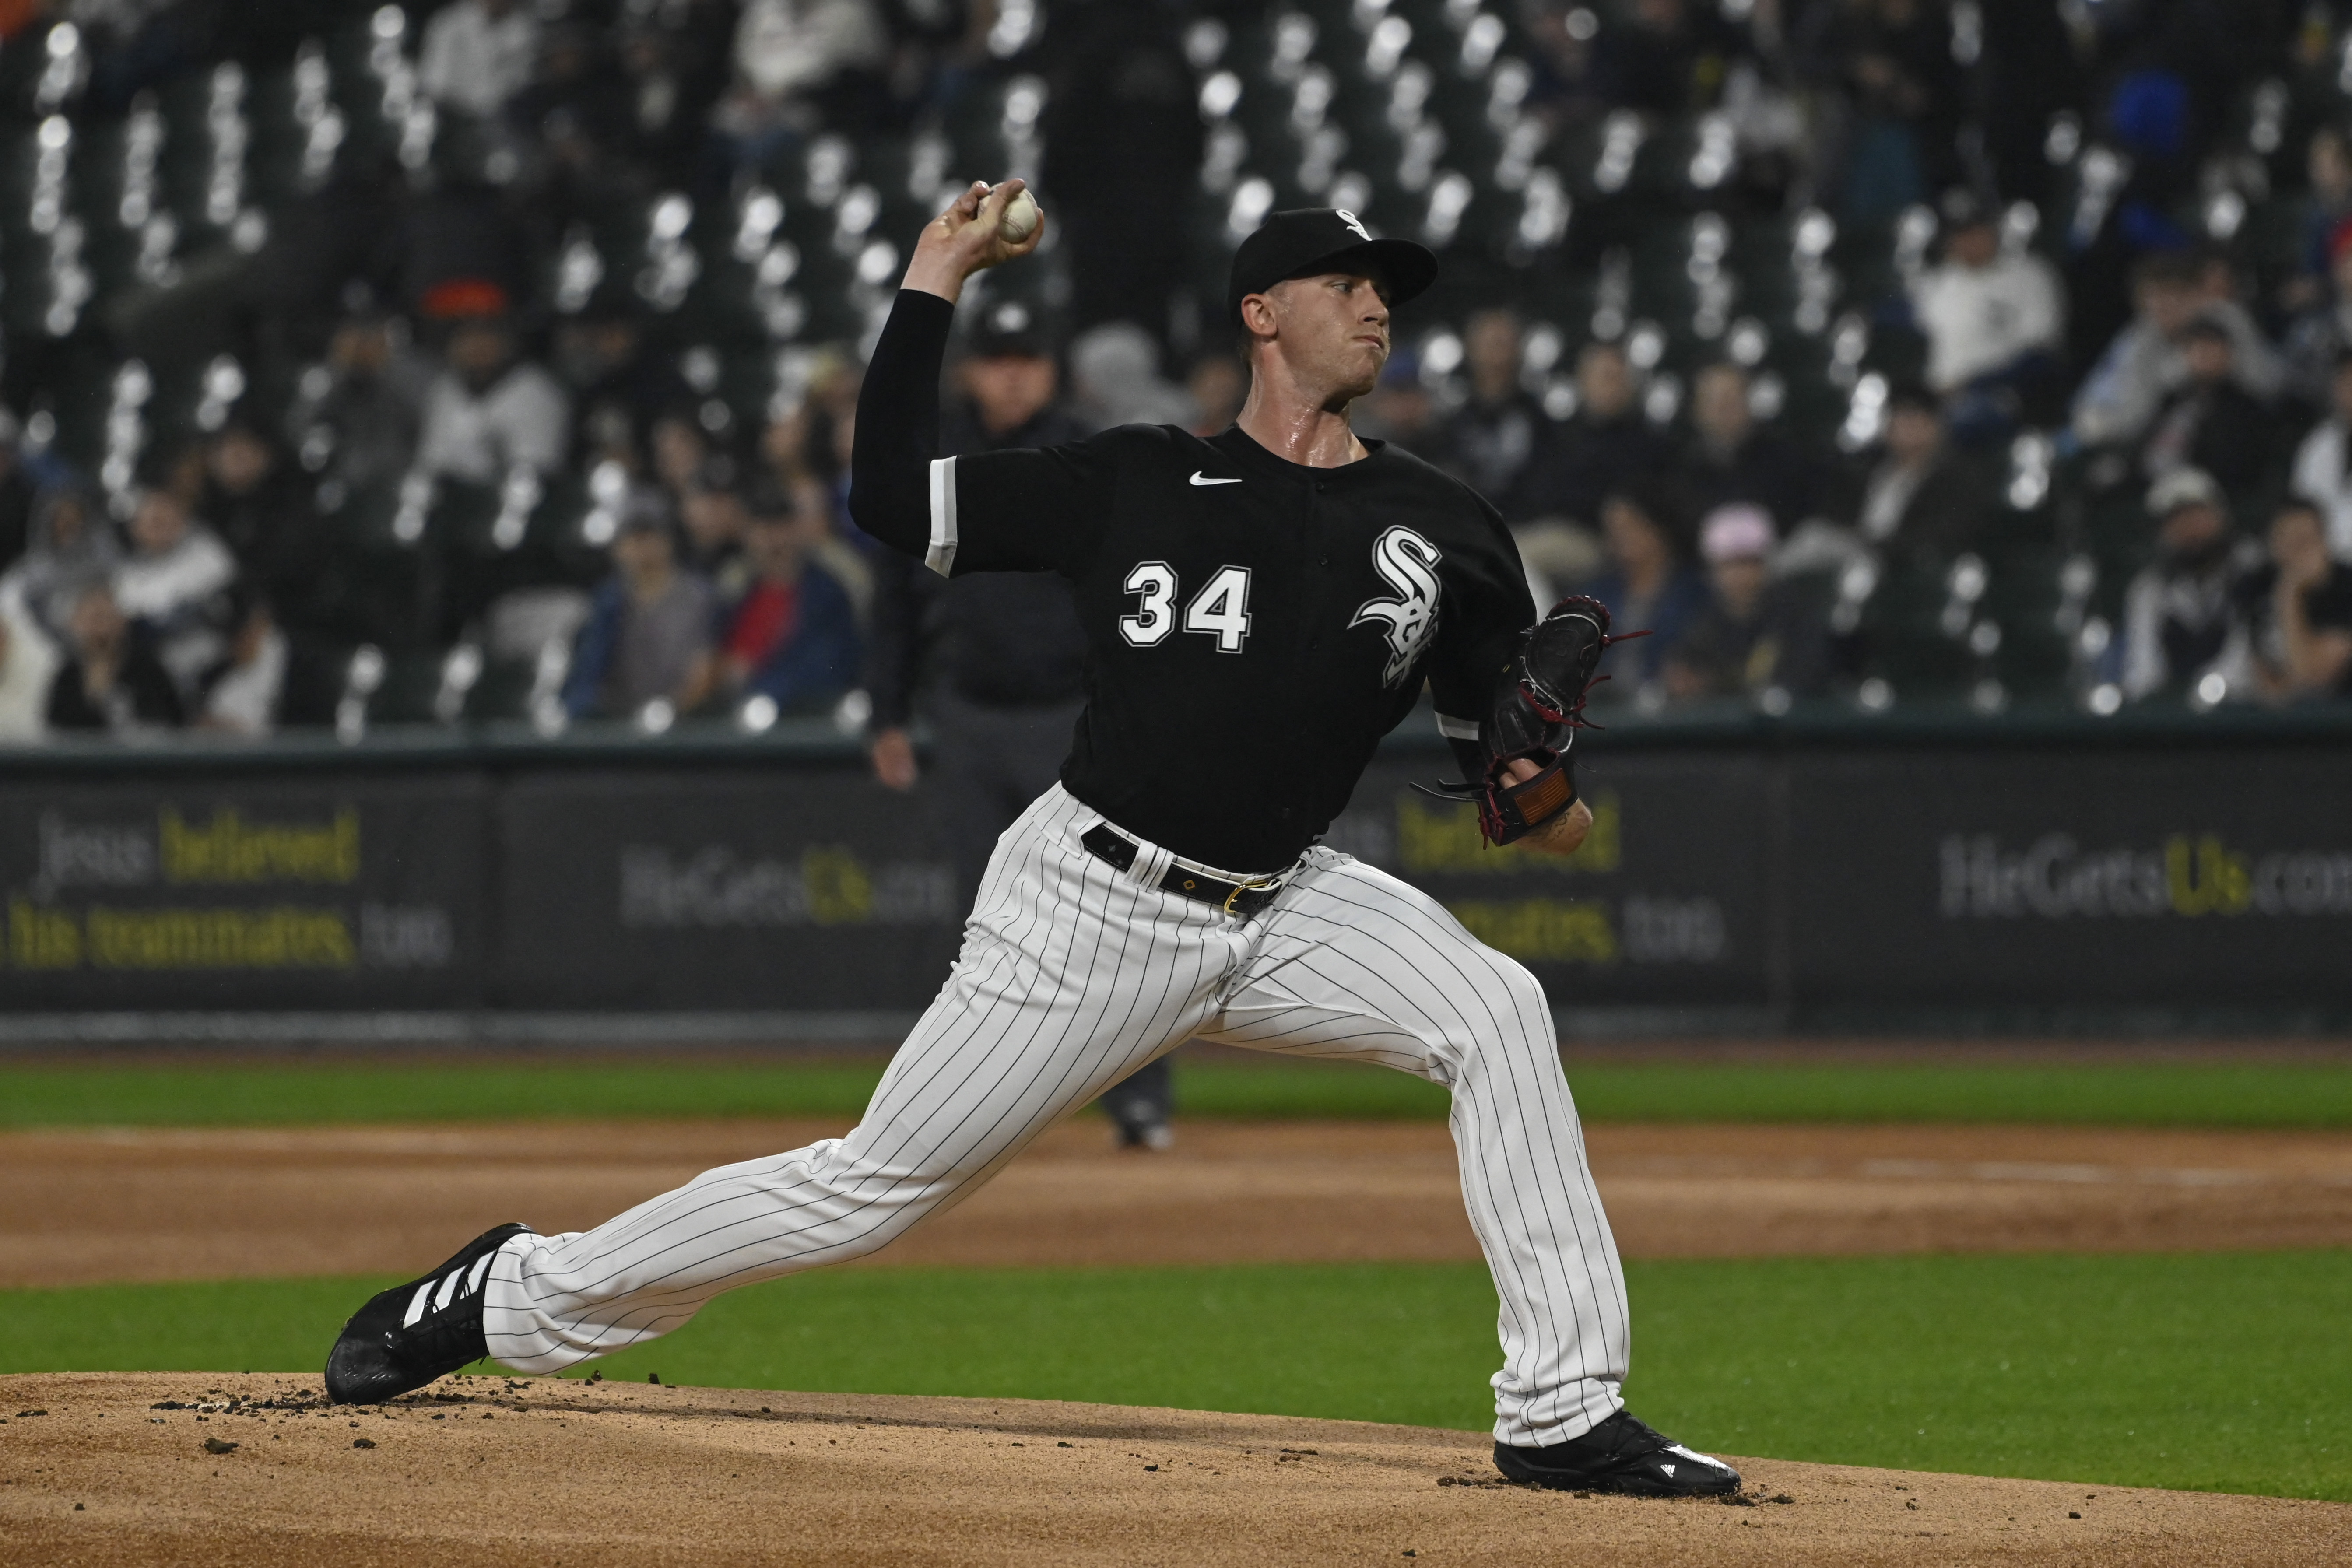 Chicago White Sox defeat the Astros, 1-0, to earn their first